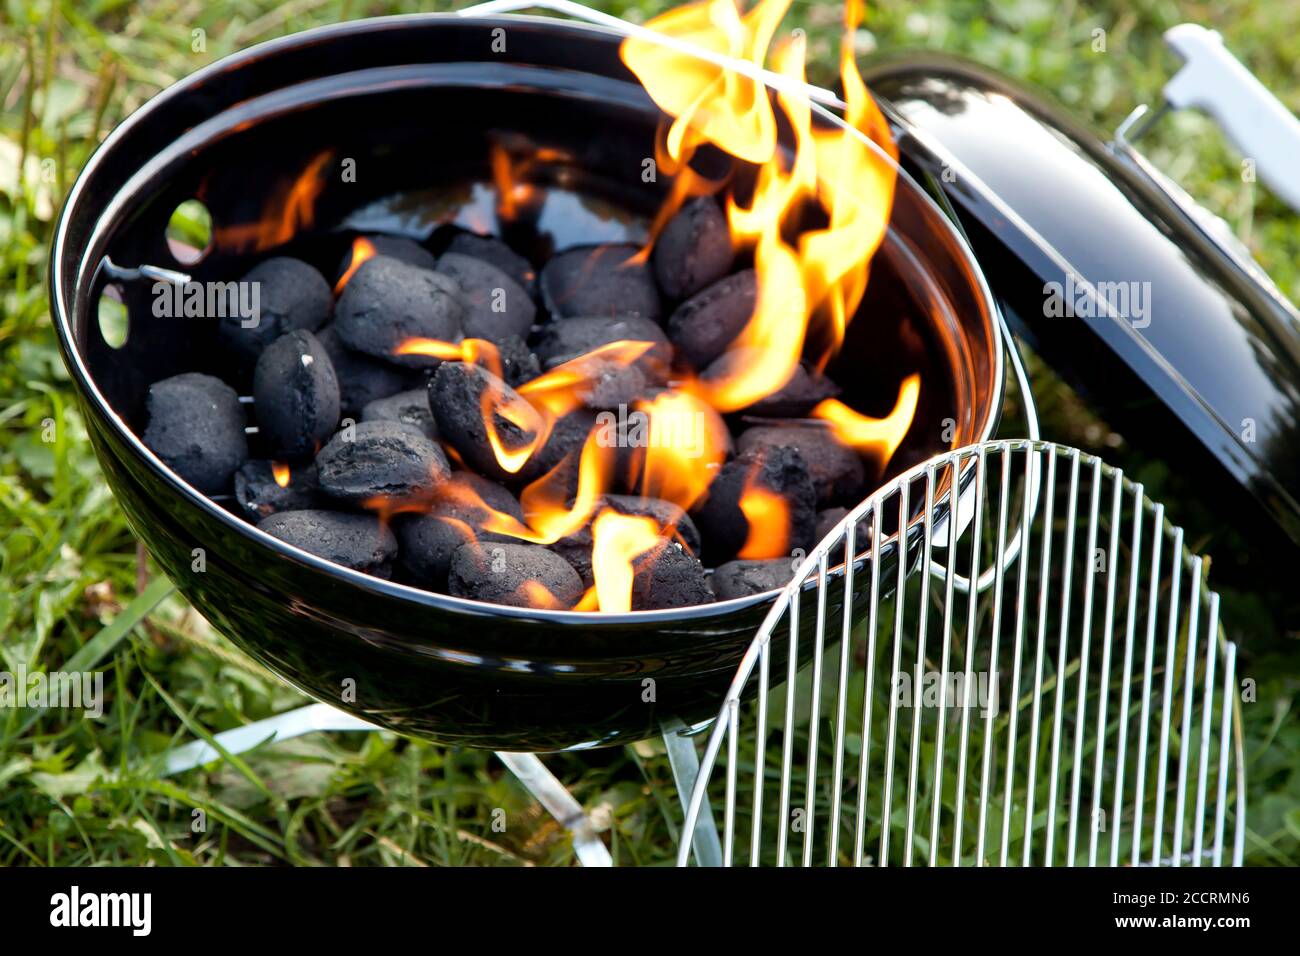 The charcoal in the grill is on fire and the flames are orange. Stock Photo